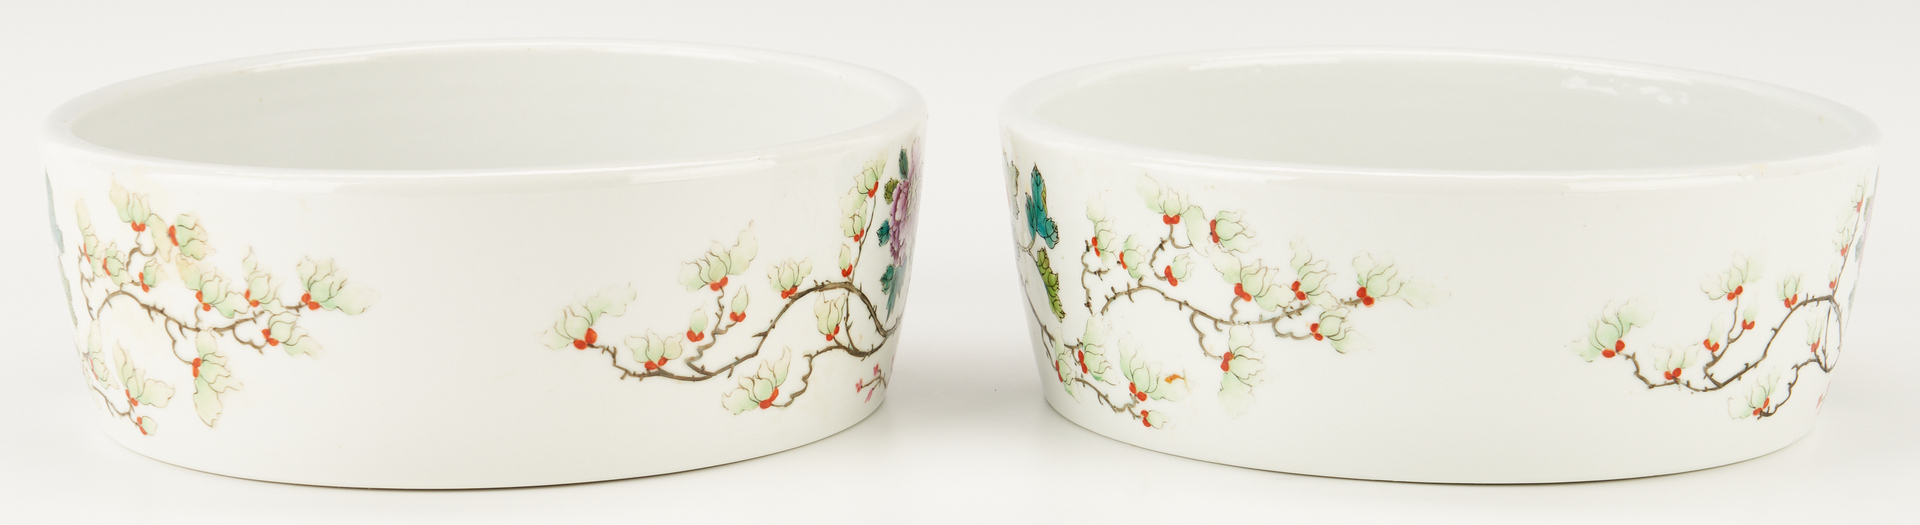 Lot 5: Pair of Chinese Famille Rose Porcelain "Narcissus" Bowls